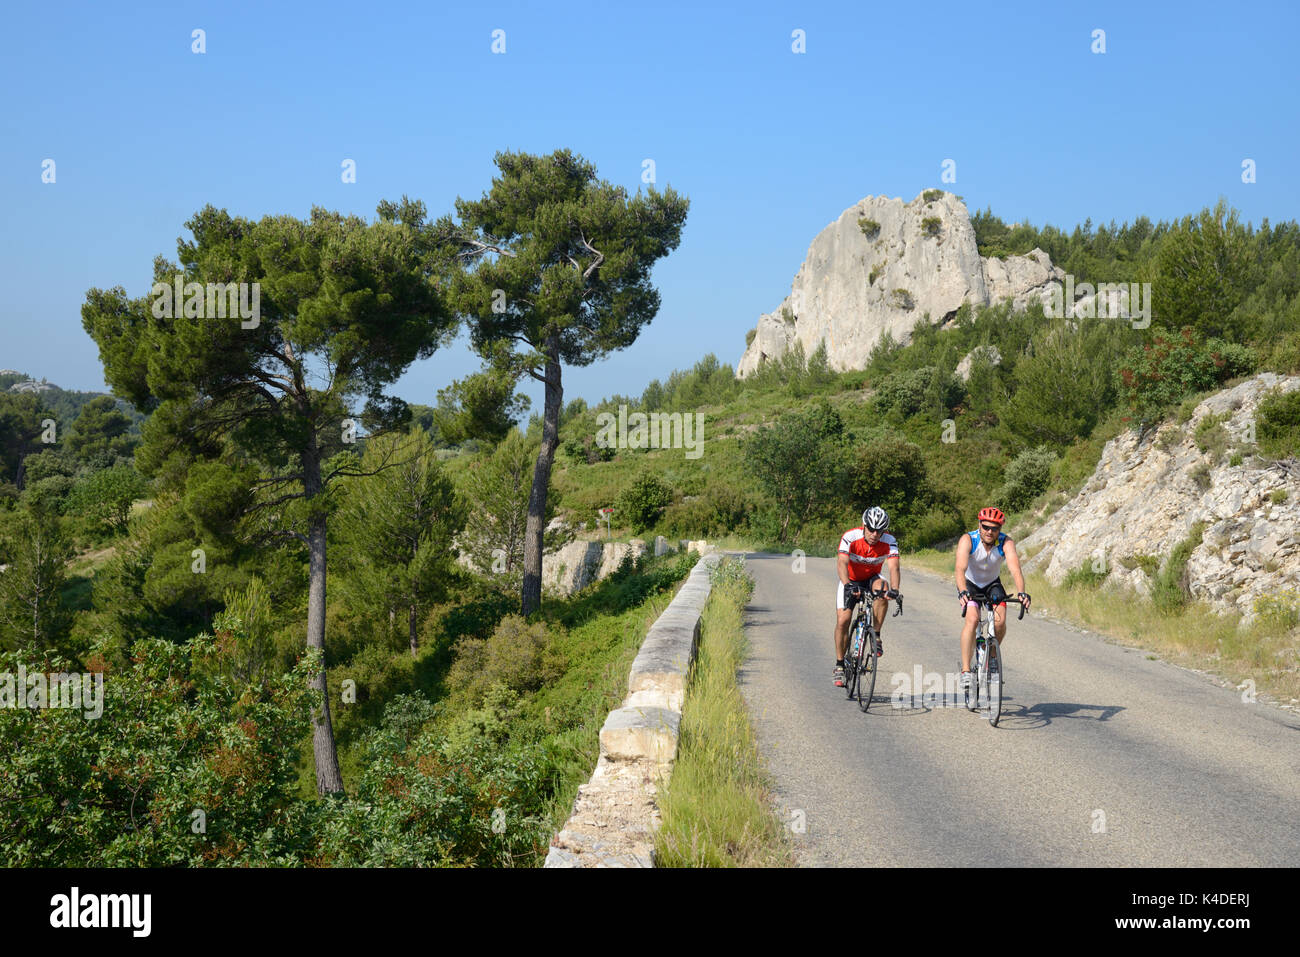 Two Cyclists Cycling on Country Road near Les Baux-de-Provence in the Alpilles Hills Provence France Stock Photo